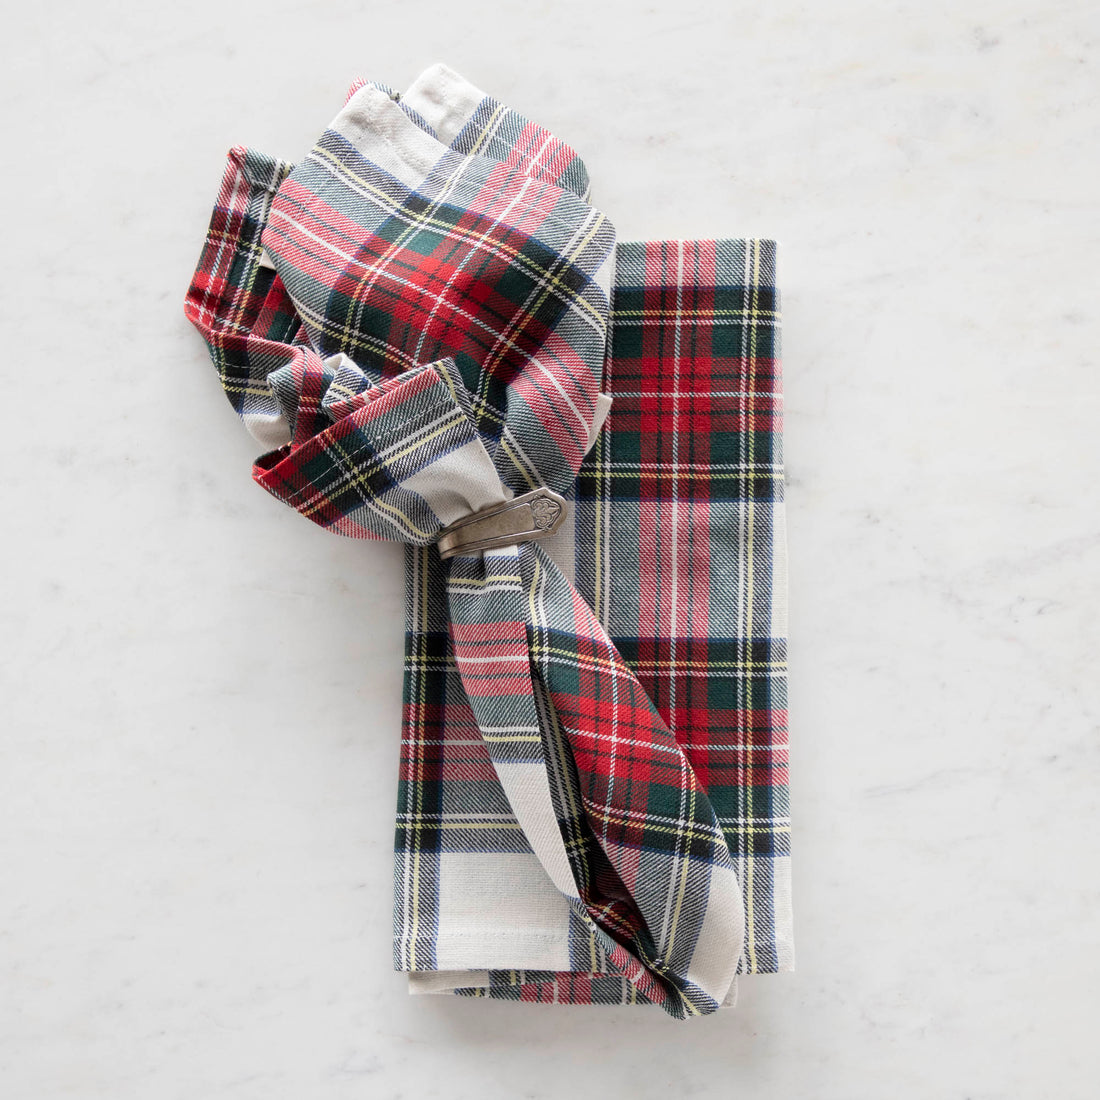 A crumpled Taylor Linen Aberdeen Plaid Napkin lying on a white surface.